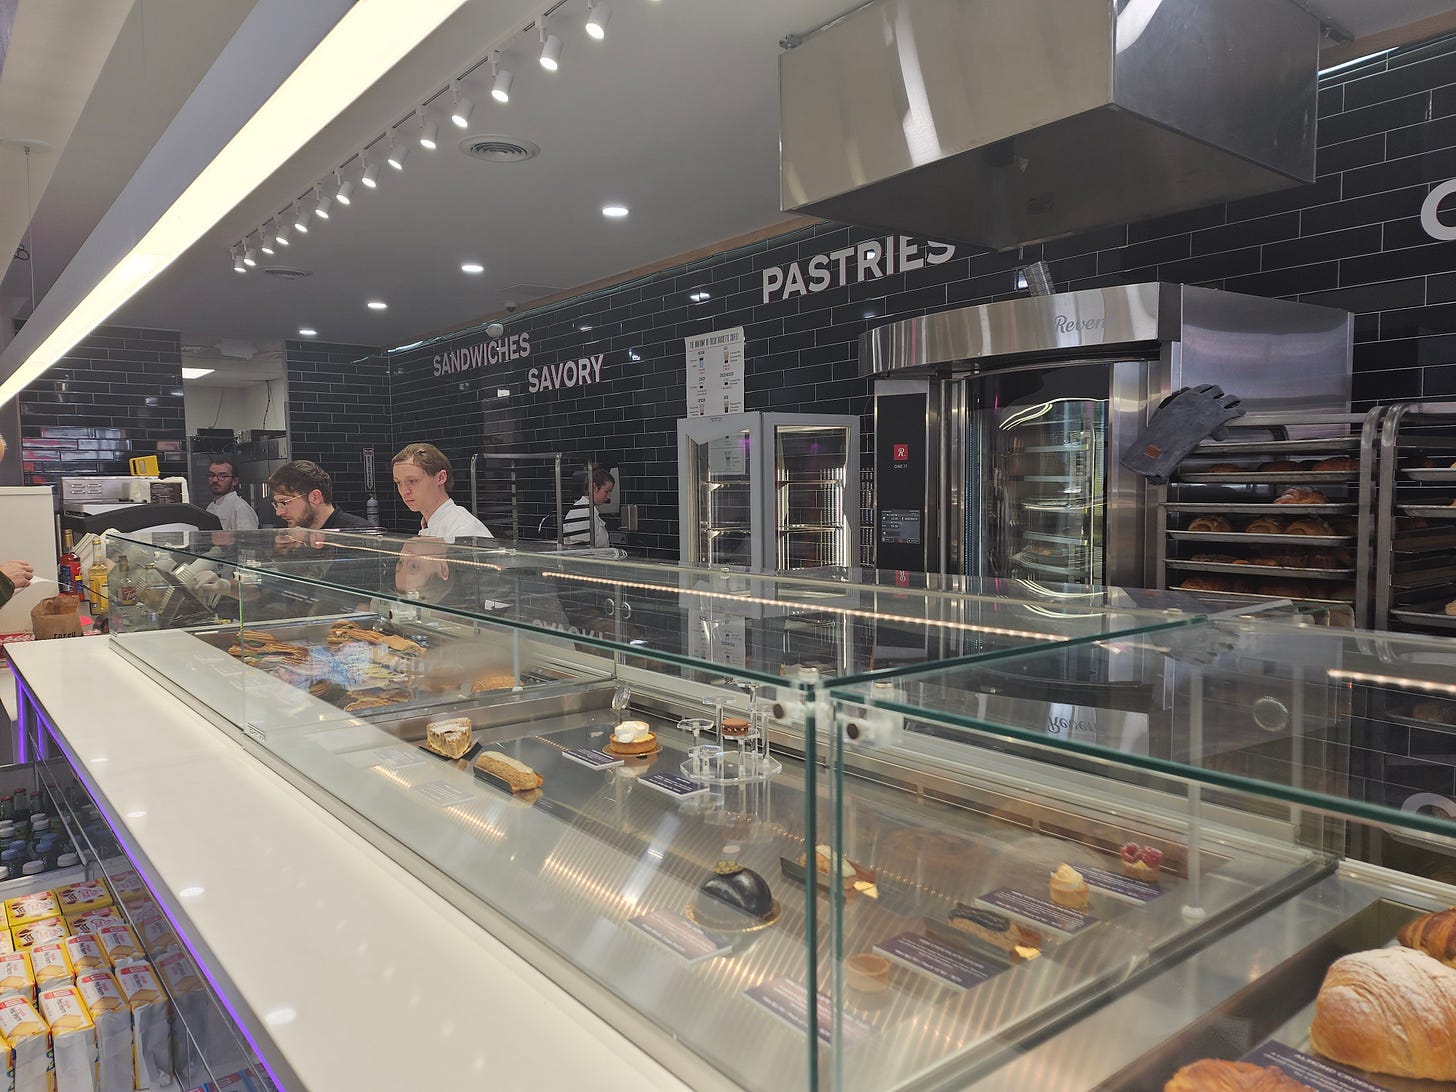 Picture shows the glass gallery with pastries in Fresh Baguette. There is ceiling lighting that is illuminating the area behind the counter with servers. A coffee machine can also be seen and a customer who is ordering.